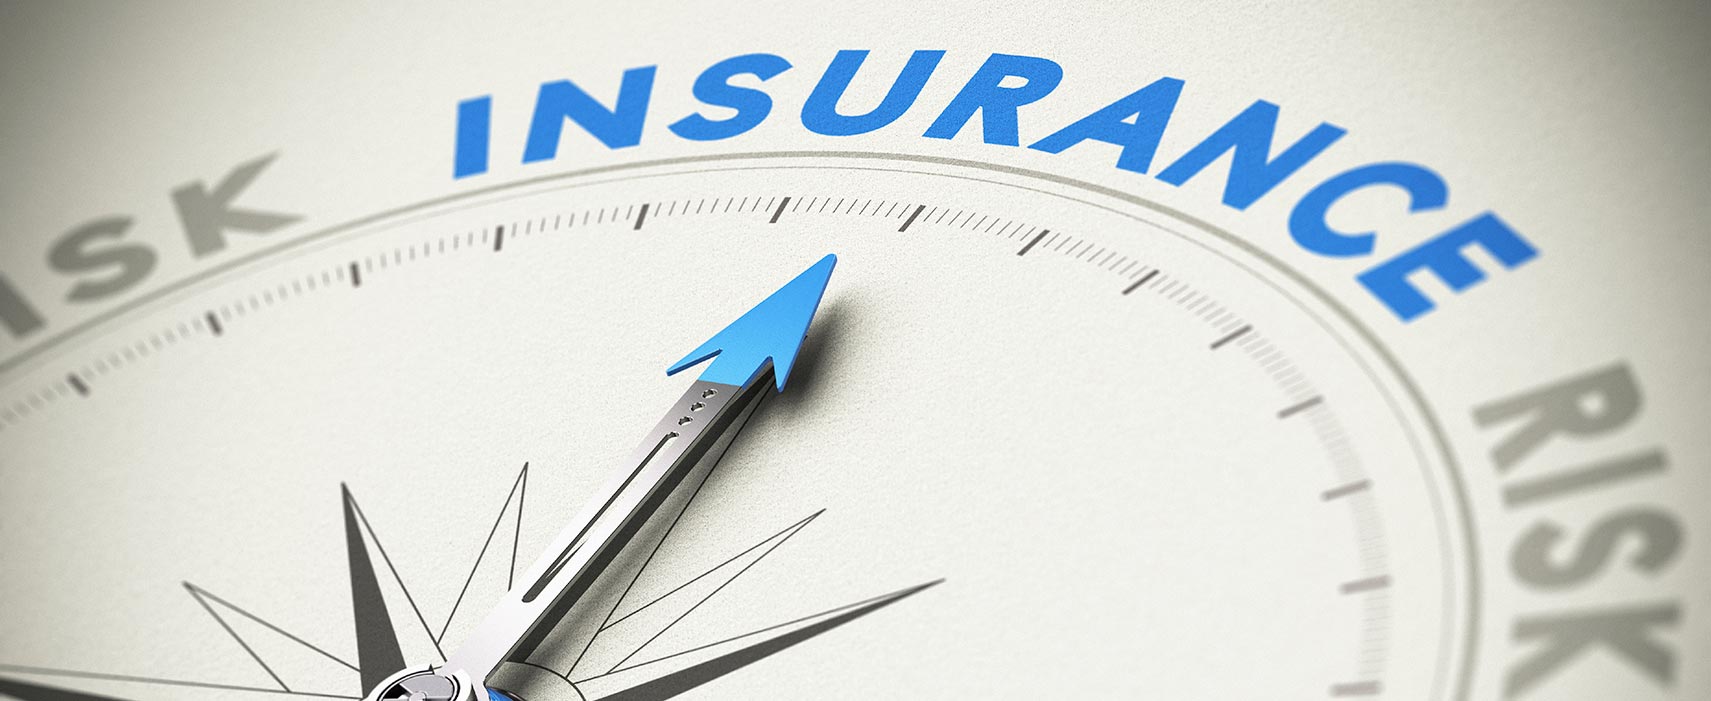 Fitzpatrick & Co Insurance Brokers not an authorised provider of mandatory lotteries insurance